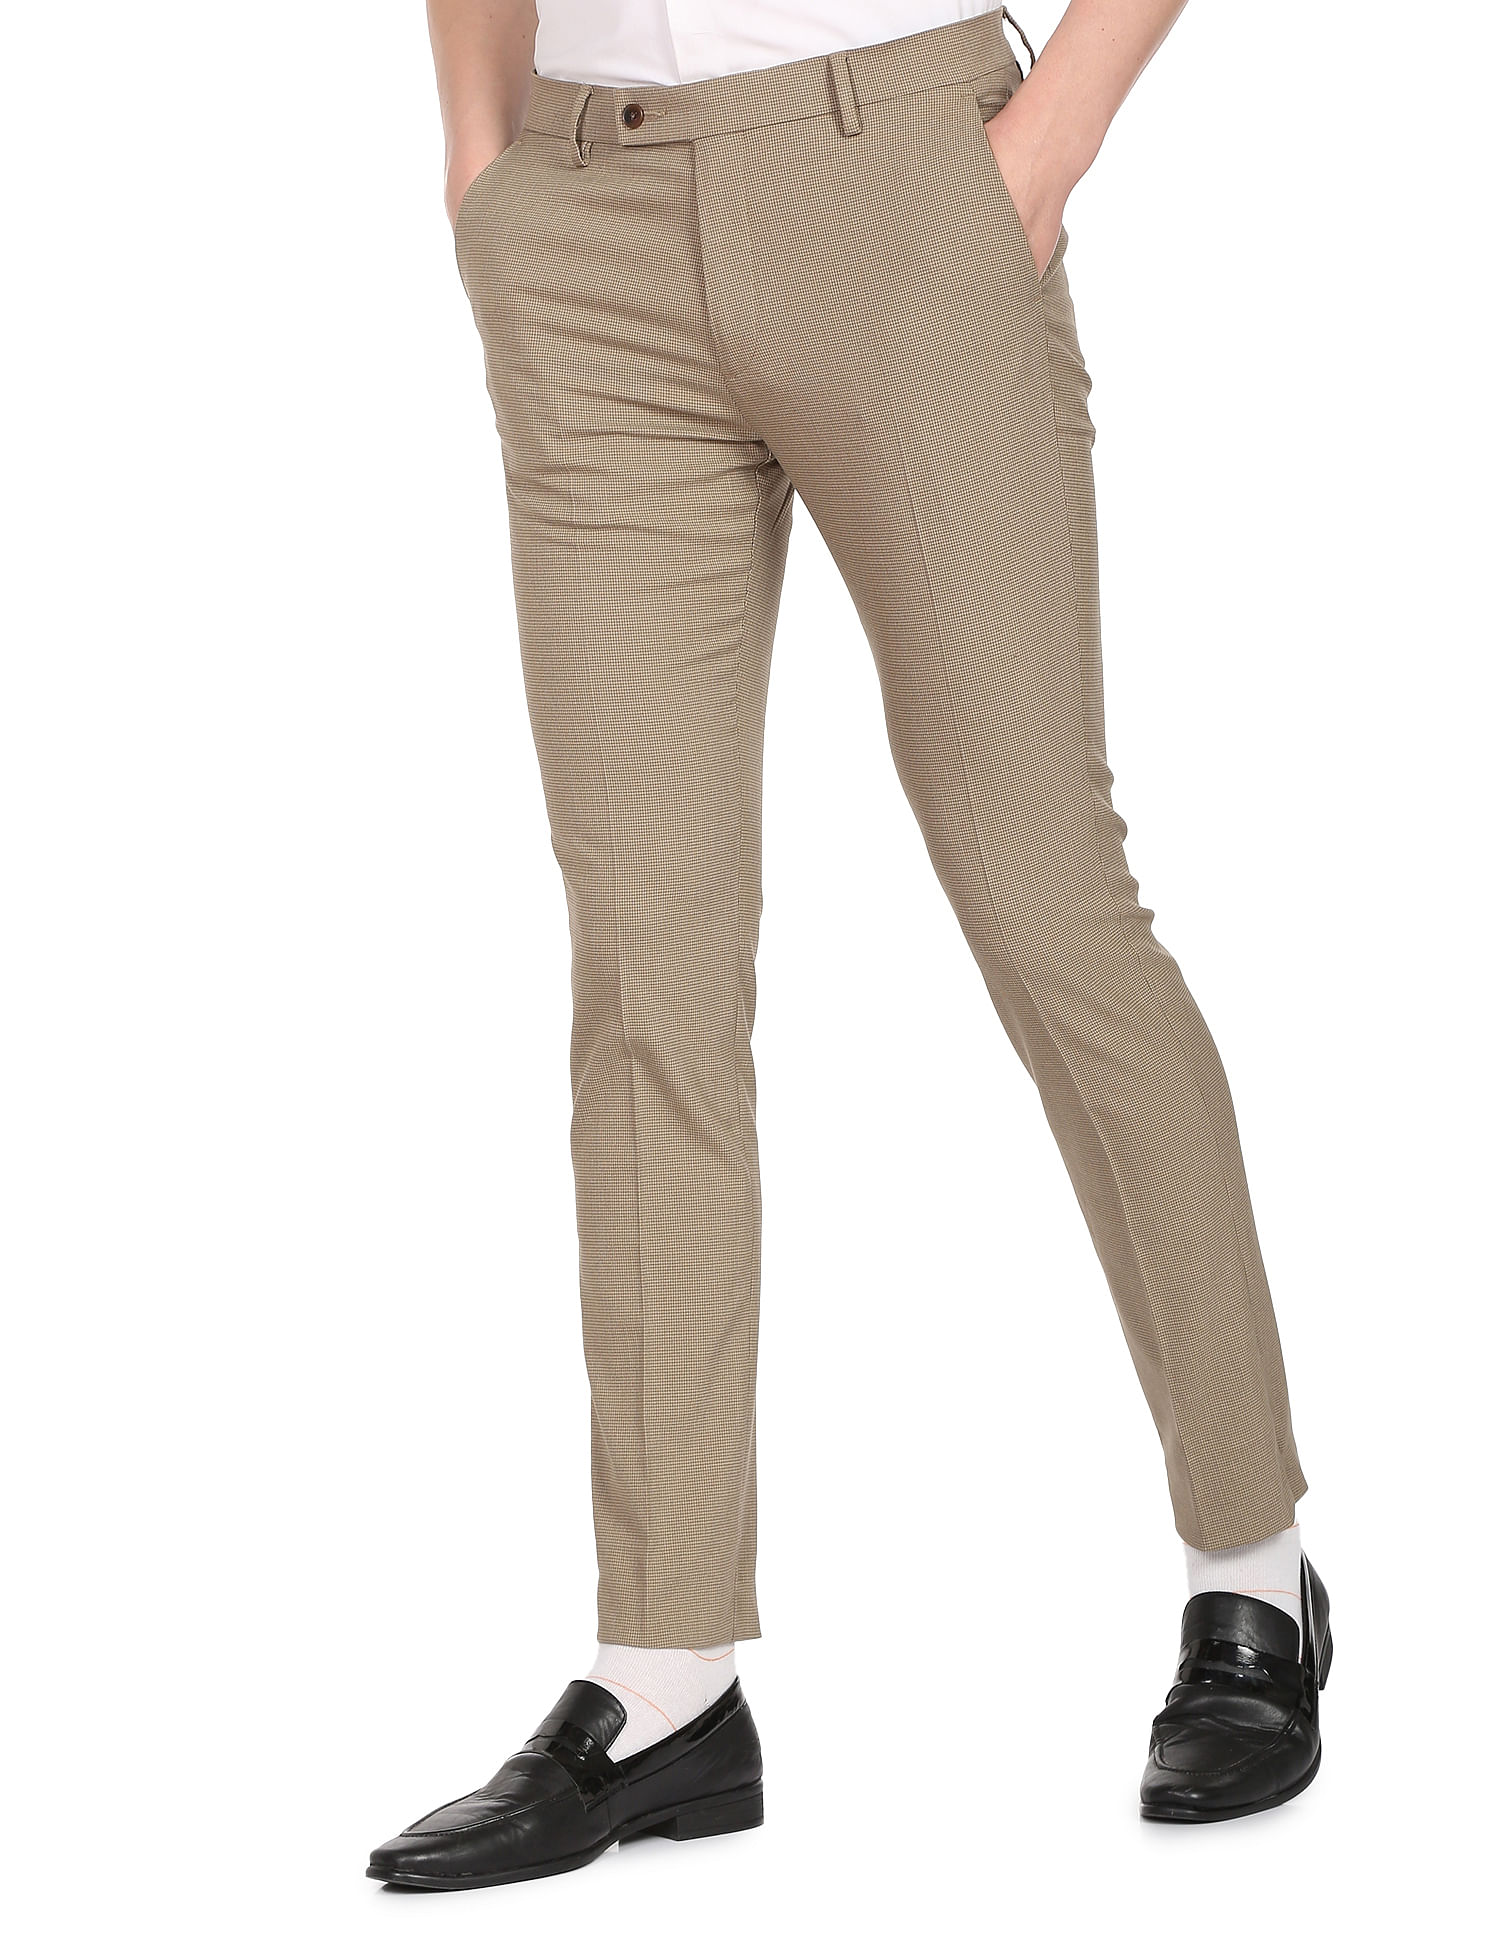 Top more than 141 micro check trousers best